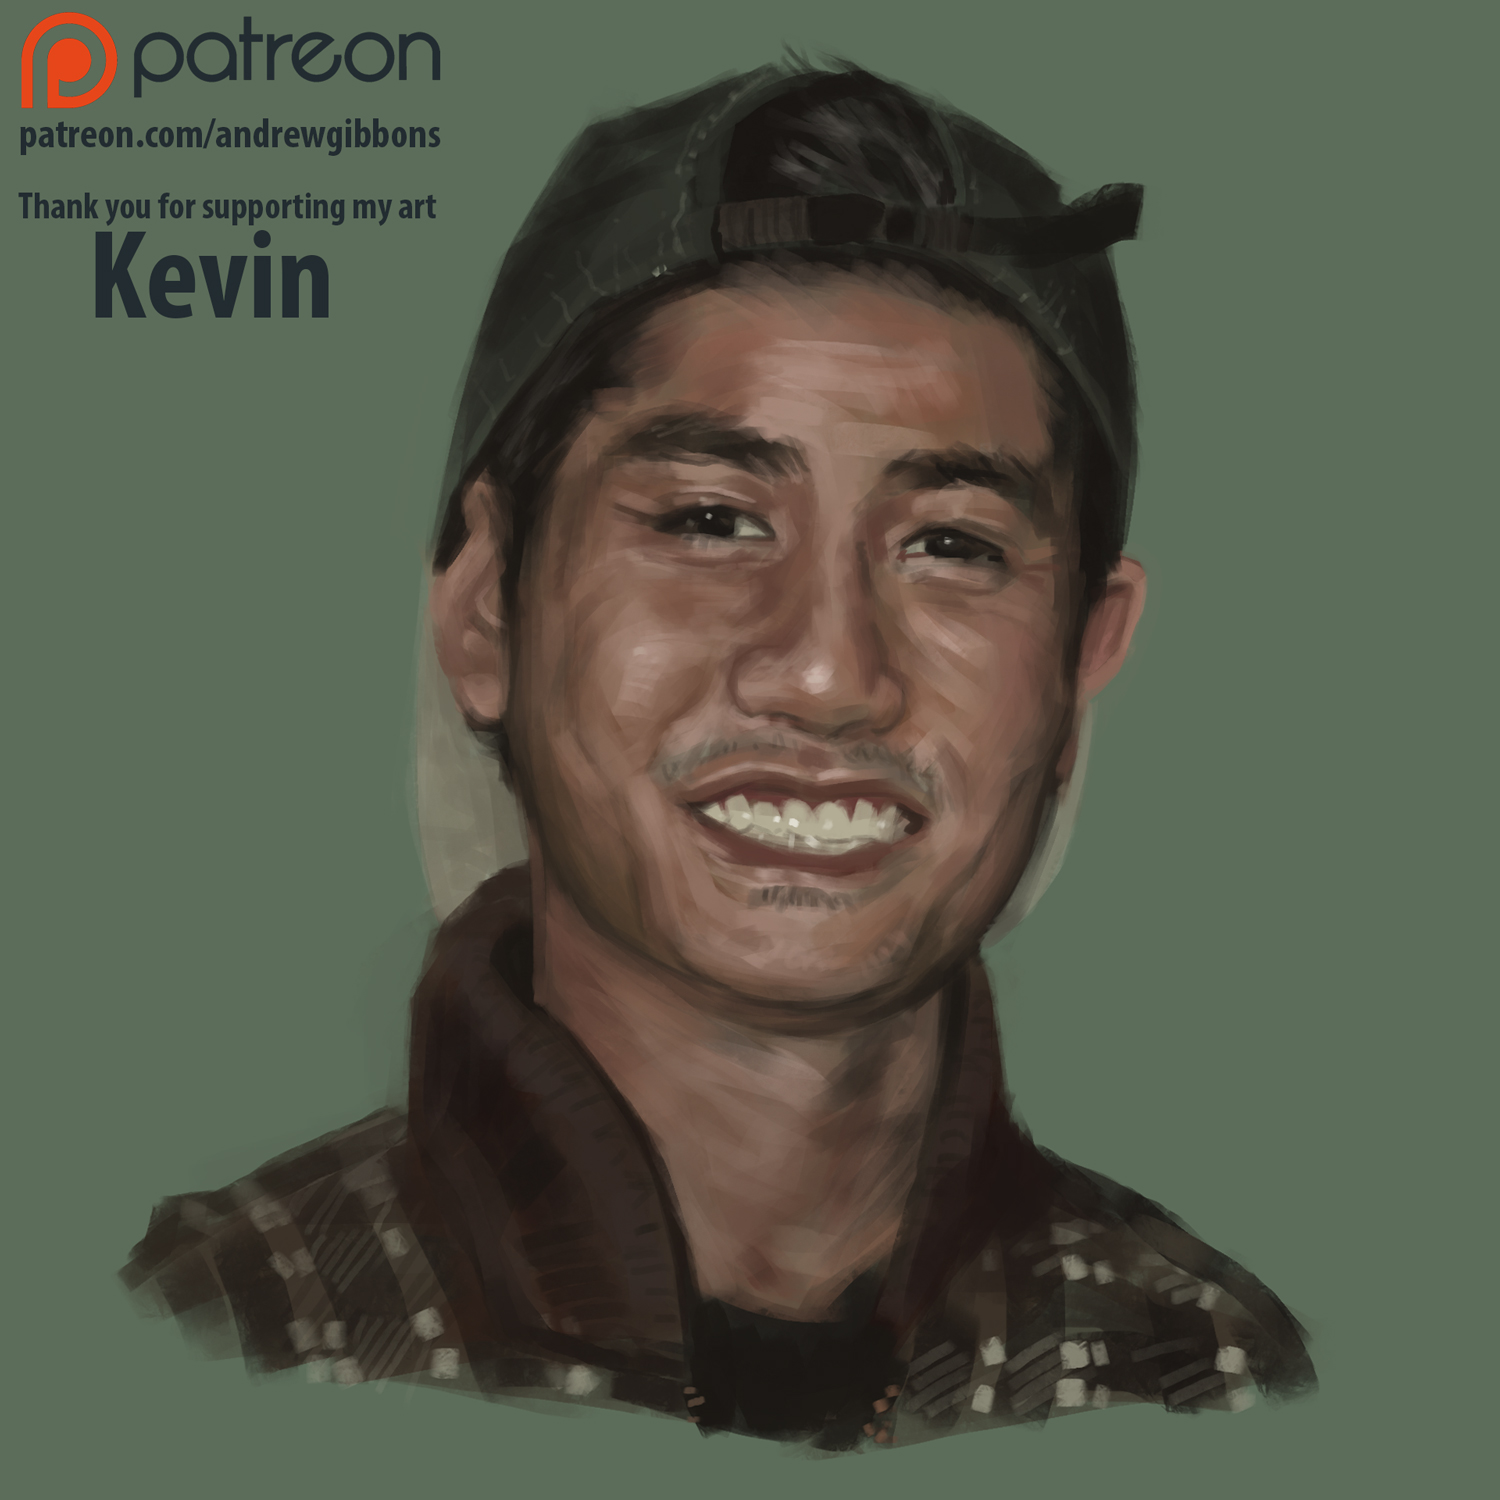 [Image: patron_portrait___kevin_by_andrew_gibbons-dbhvhrp.jpg]